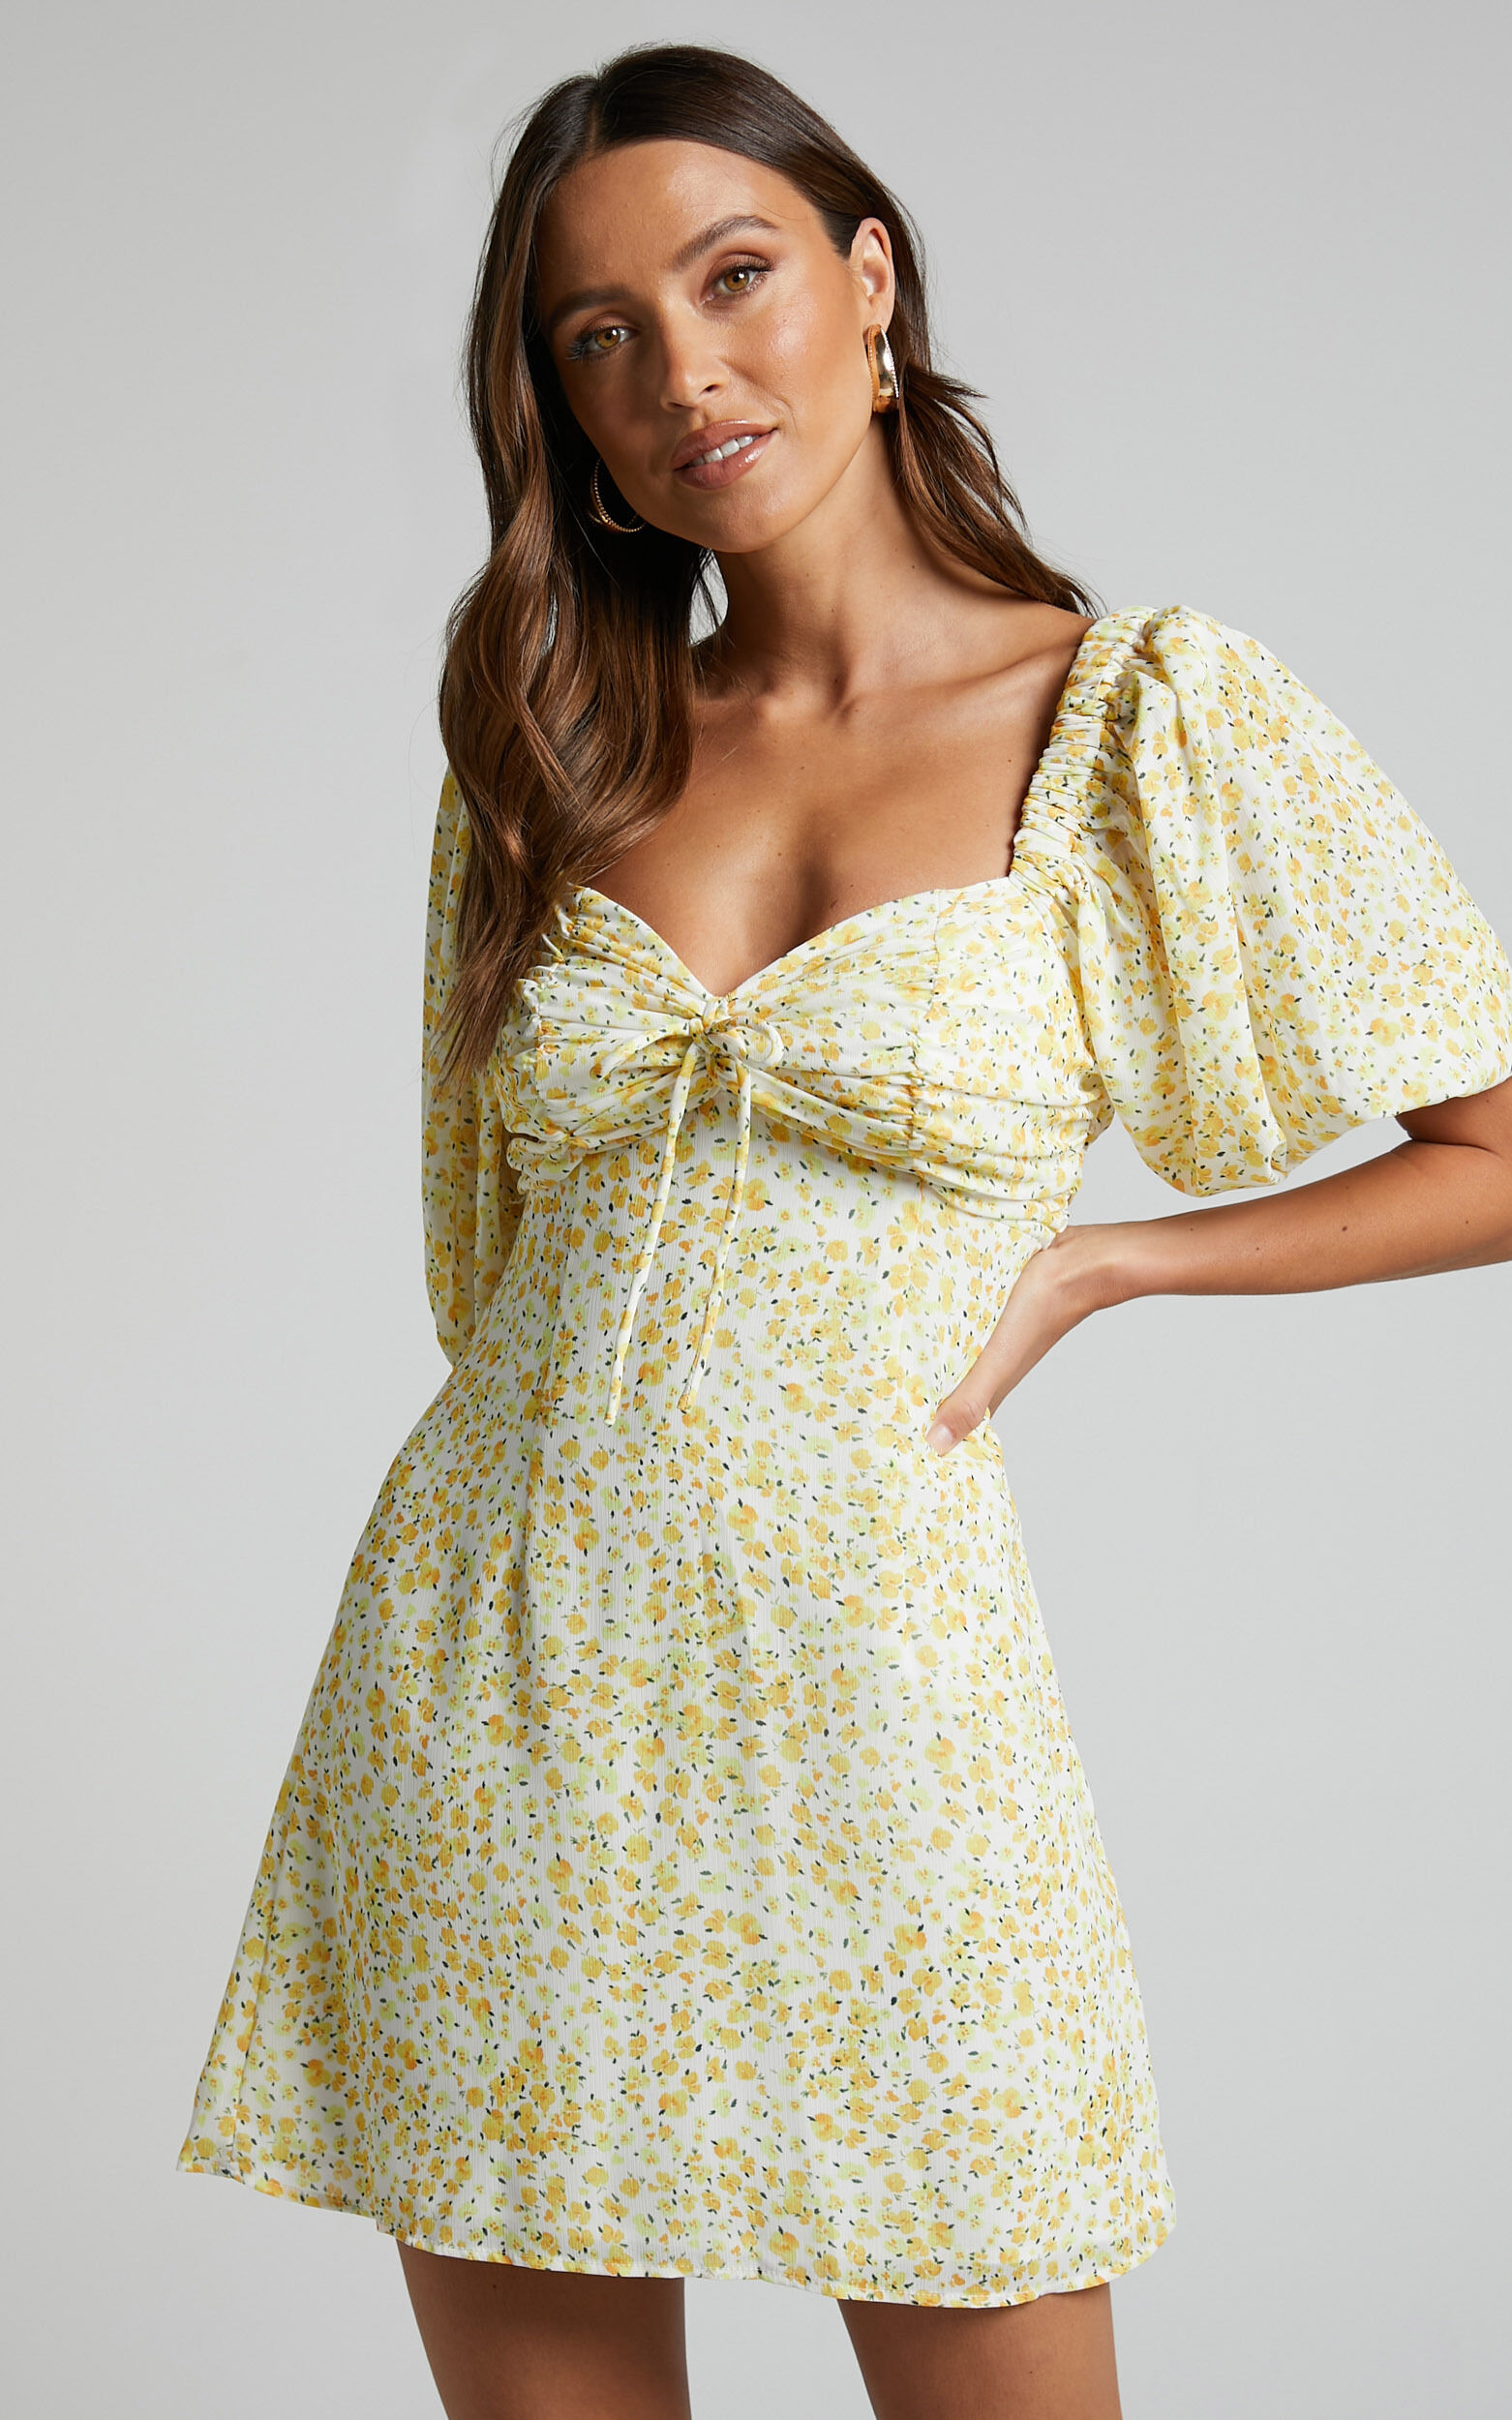 Rhenzy Mini Dress - Puff Sleeve Dress in Sunshine Ditzy - 06, YEL1, super-hi-res image number null